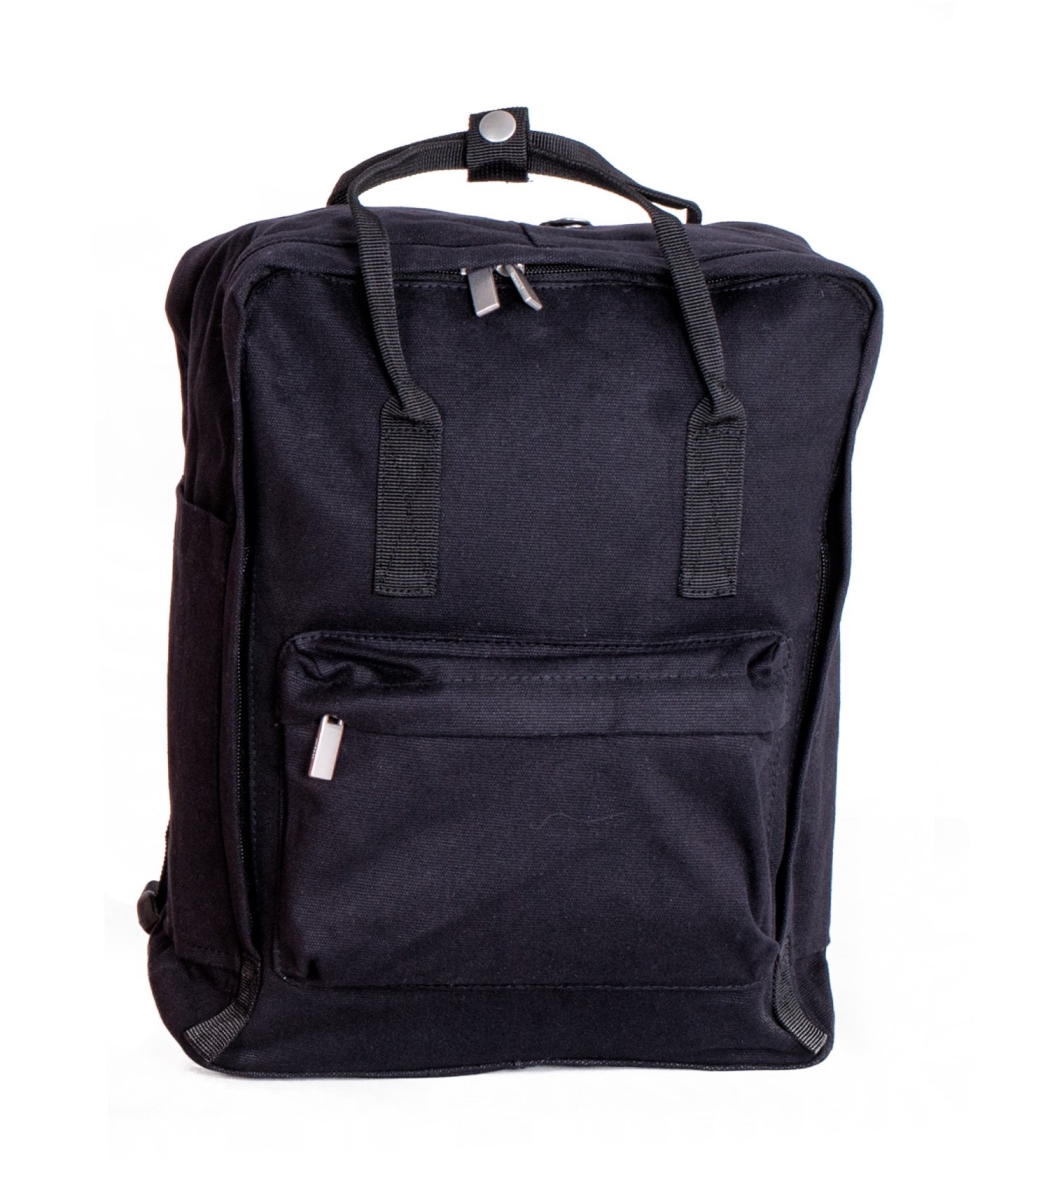 Mbk002-black Mini Backpack With Tablet Compartment - Black